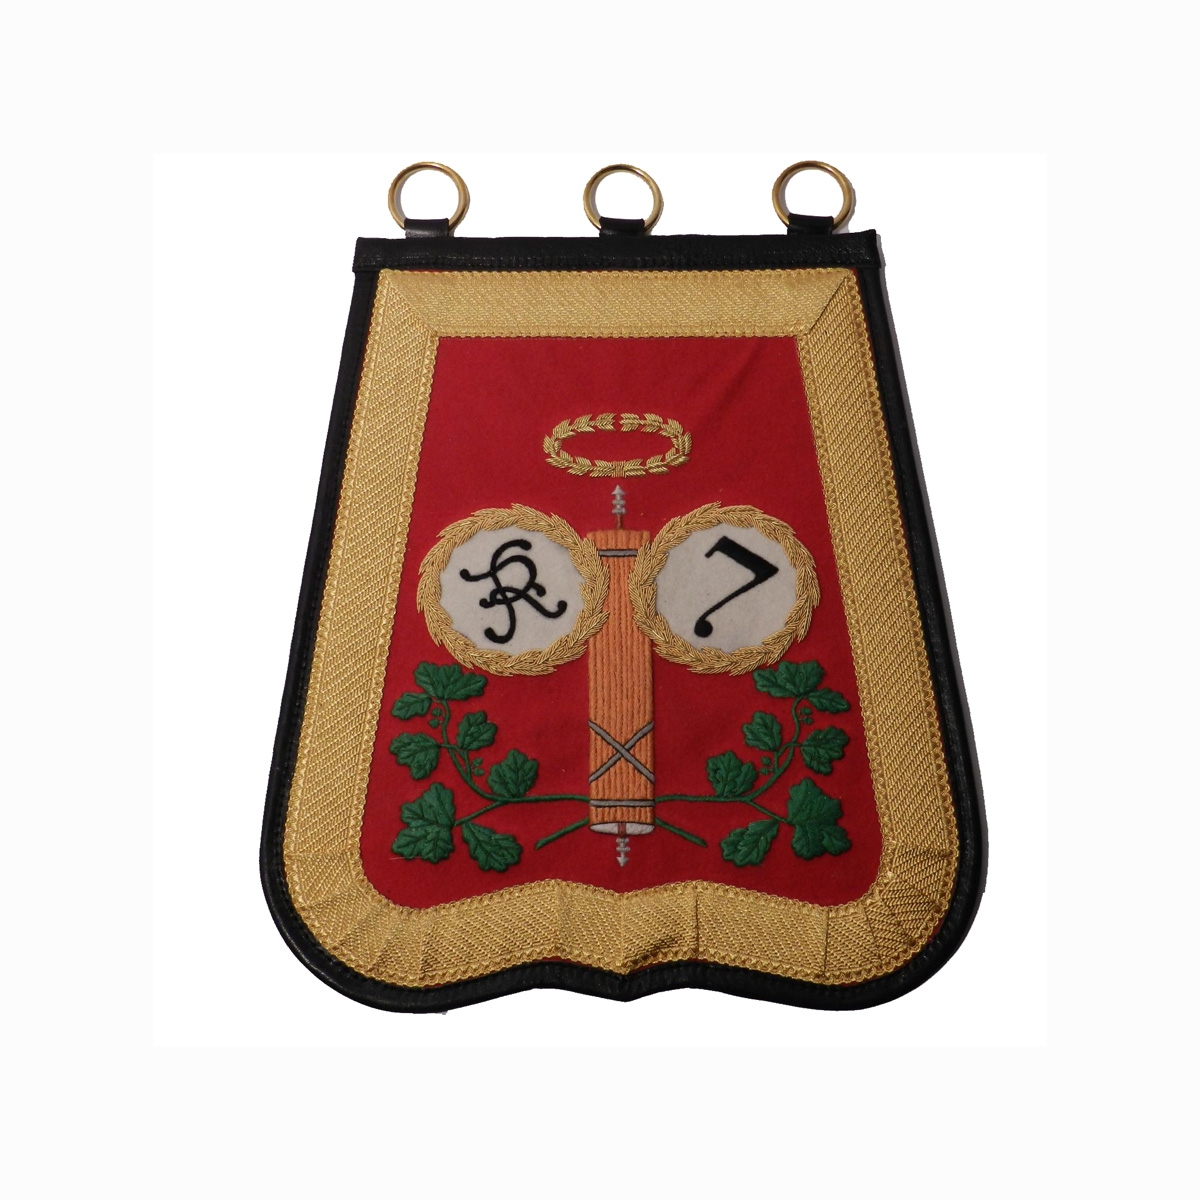 7 th hussar revolution sabretache  green red and gold color flag Embroidery Banner Flag